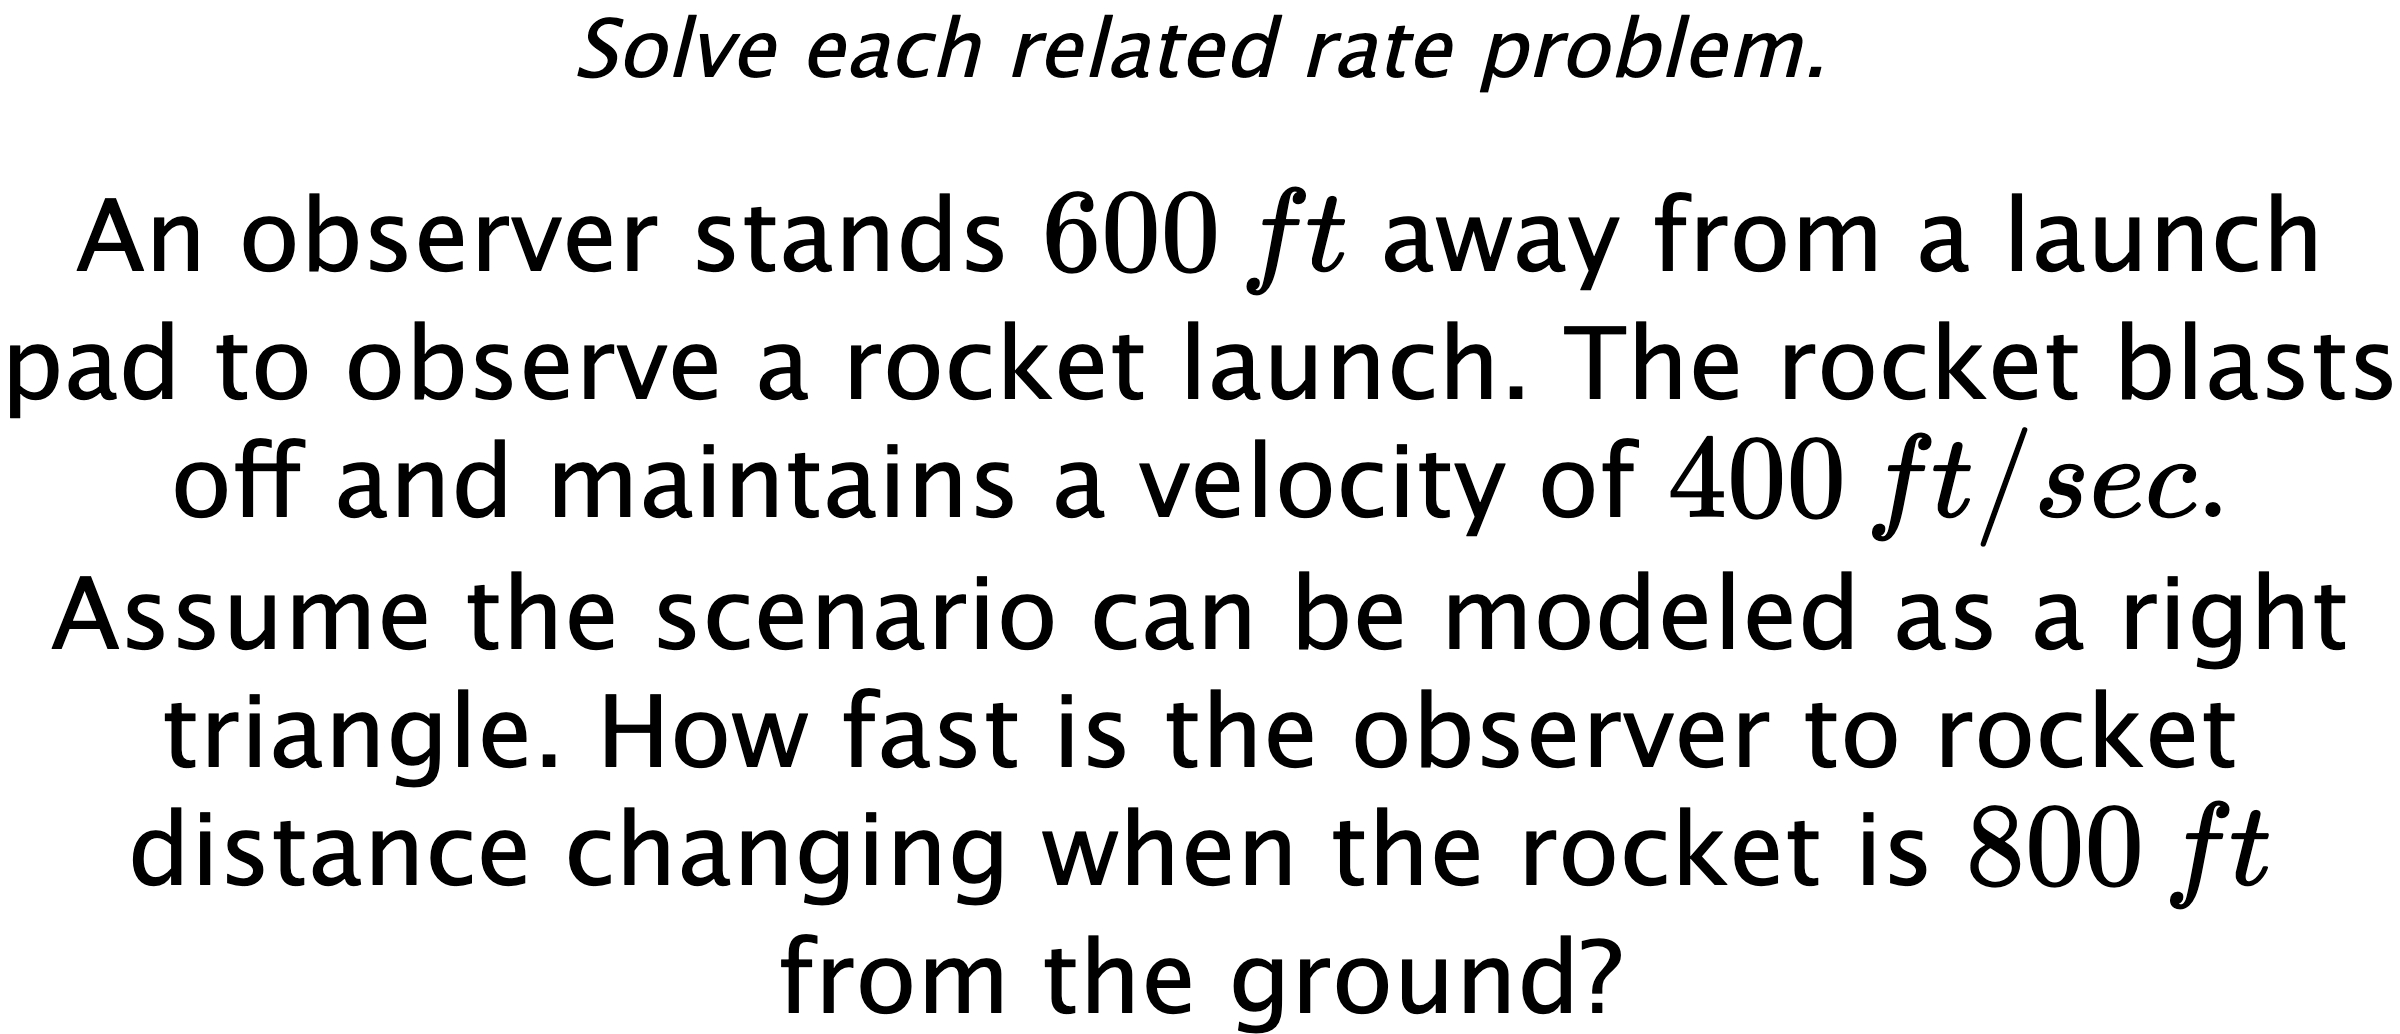 Solve each related rate problem. An observer stands $600\,ft$ away from a launch pad to observe a rocket launch. The rocket blasts off and maintains a velocity of $400\,ft/sec.$ Assume the scenario can be modeled as a right triangle. How fast is the observer to rocket distance changing when the rocket is $800\,ft$ from the ground?